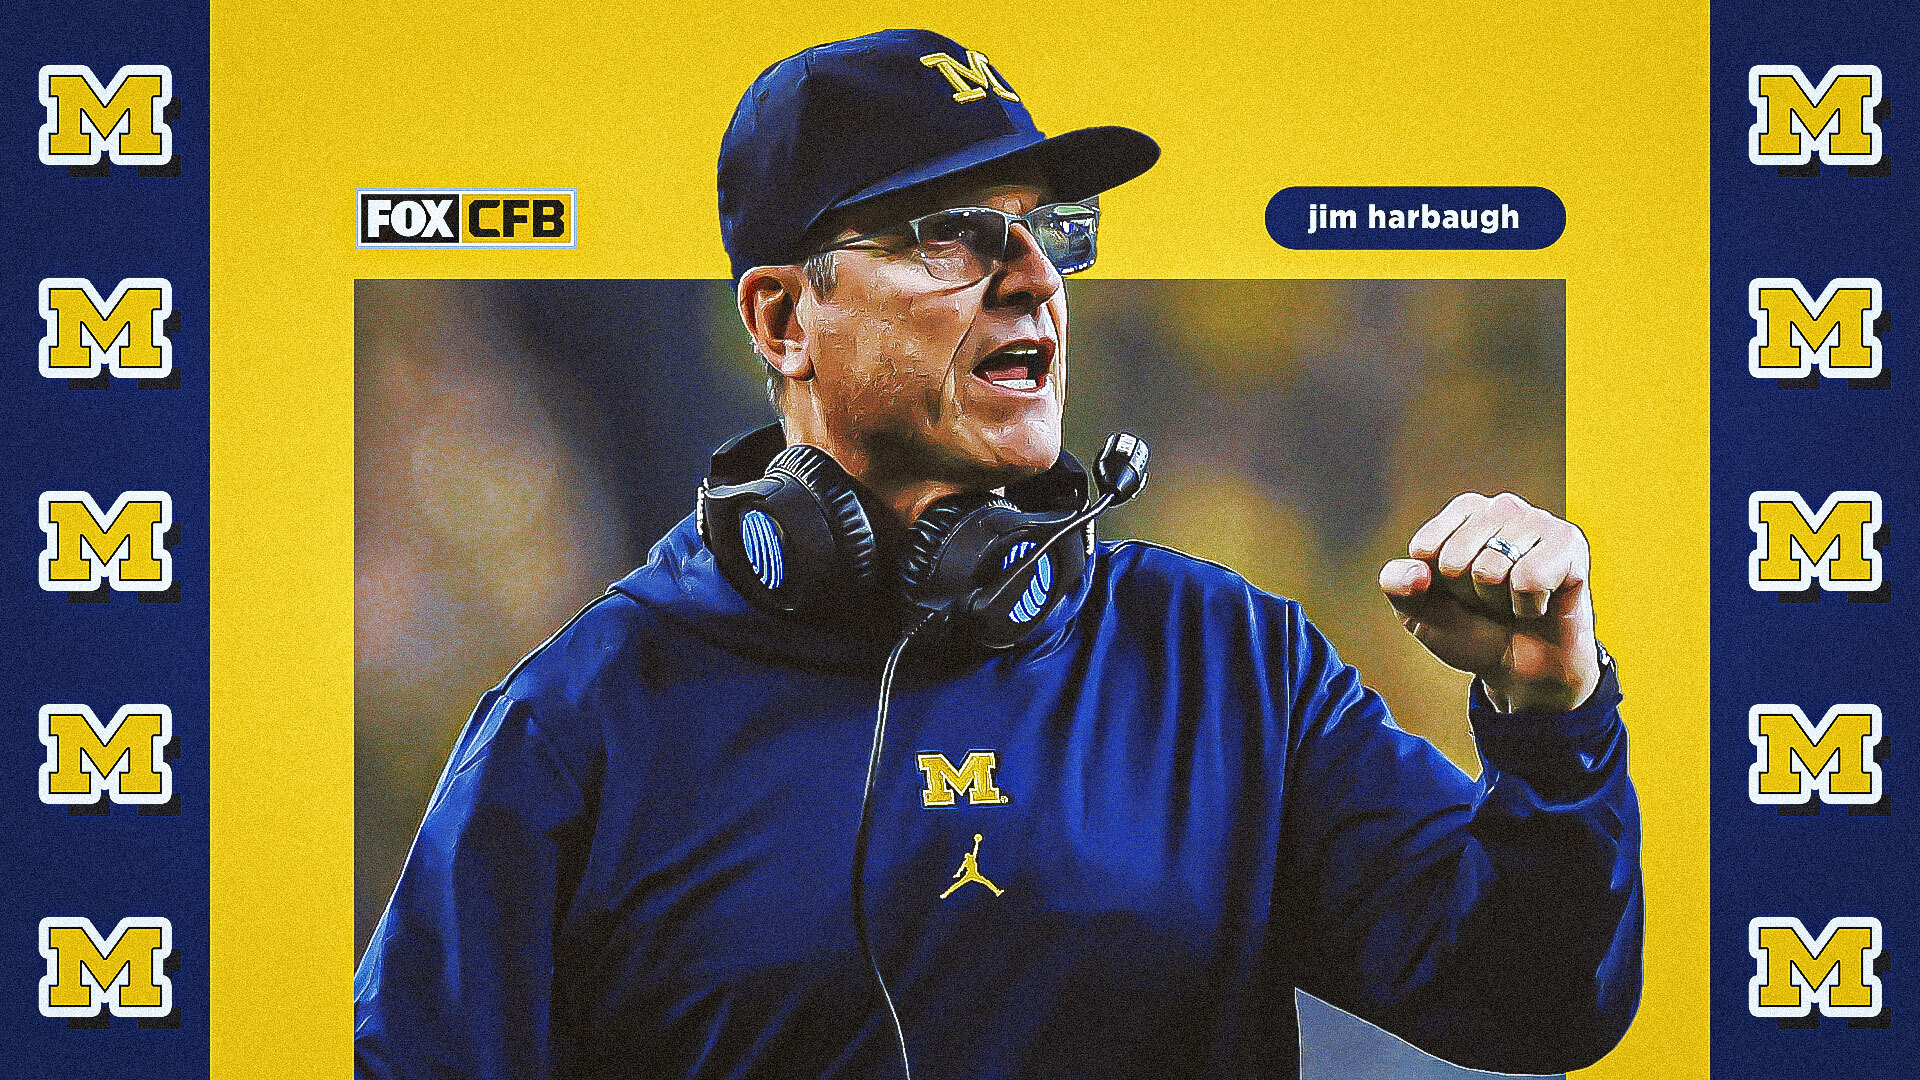 Now that Jim Harbaugh has reached the peak at Michigan, what comes next?